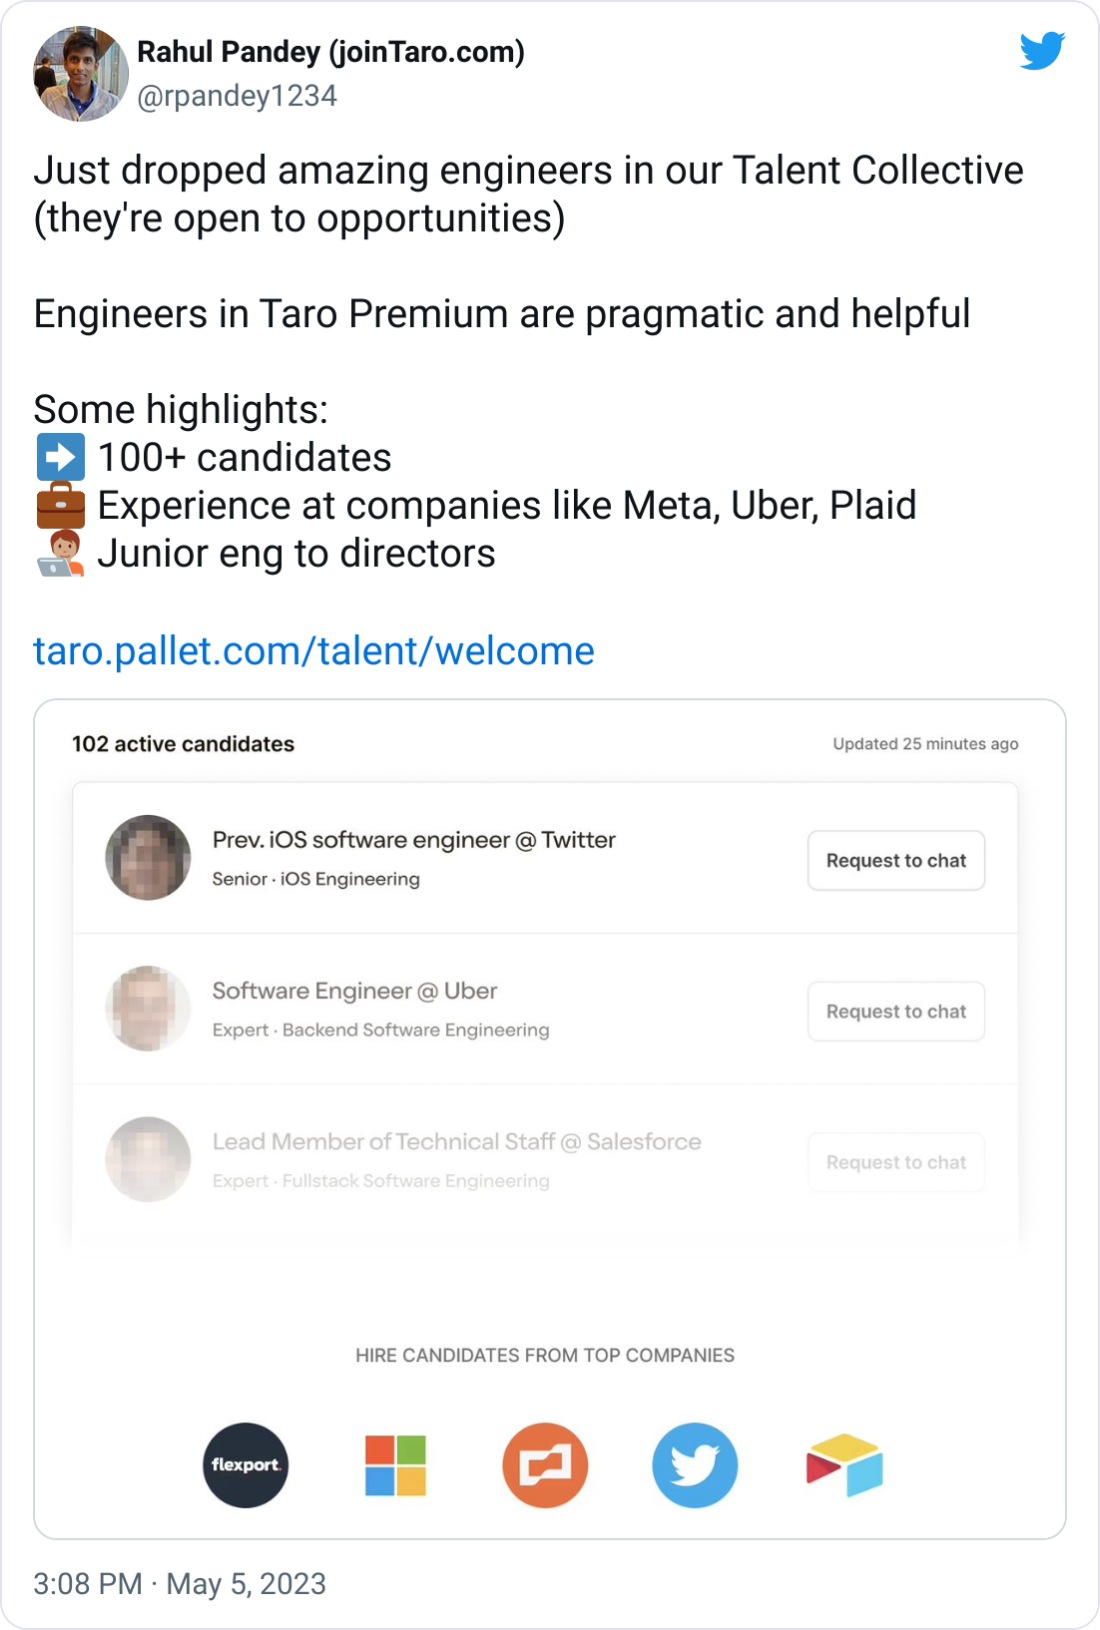 Rahul Pandey (joinTaro.com) @rpandey1234 Just dropped amazing engineers in our Talent Collective (they're open to opportunities)  Engineers in Taro Premium are pragmatic and helpful  Some highlights: ➡ 100+ candidates 💼 Experience at companies like Meta, Uber, Plaid 🧑🏽‍💻 Junior eng to directors  https://taro.pallet.com/talent/welcome